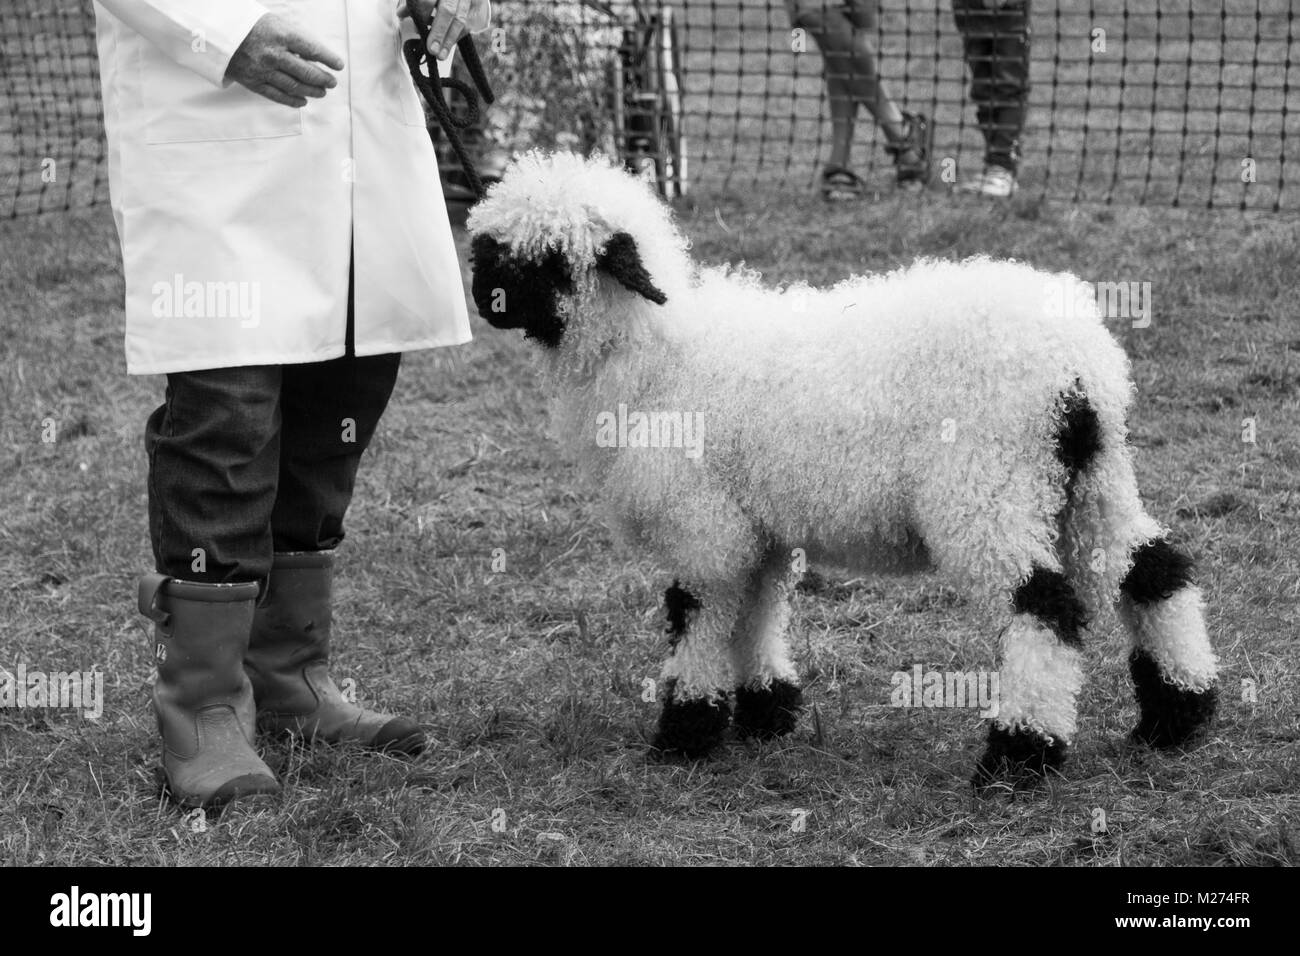 A New Forest Valais Blacknose sheep is shown at a country show in Hampshire Stock Photo